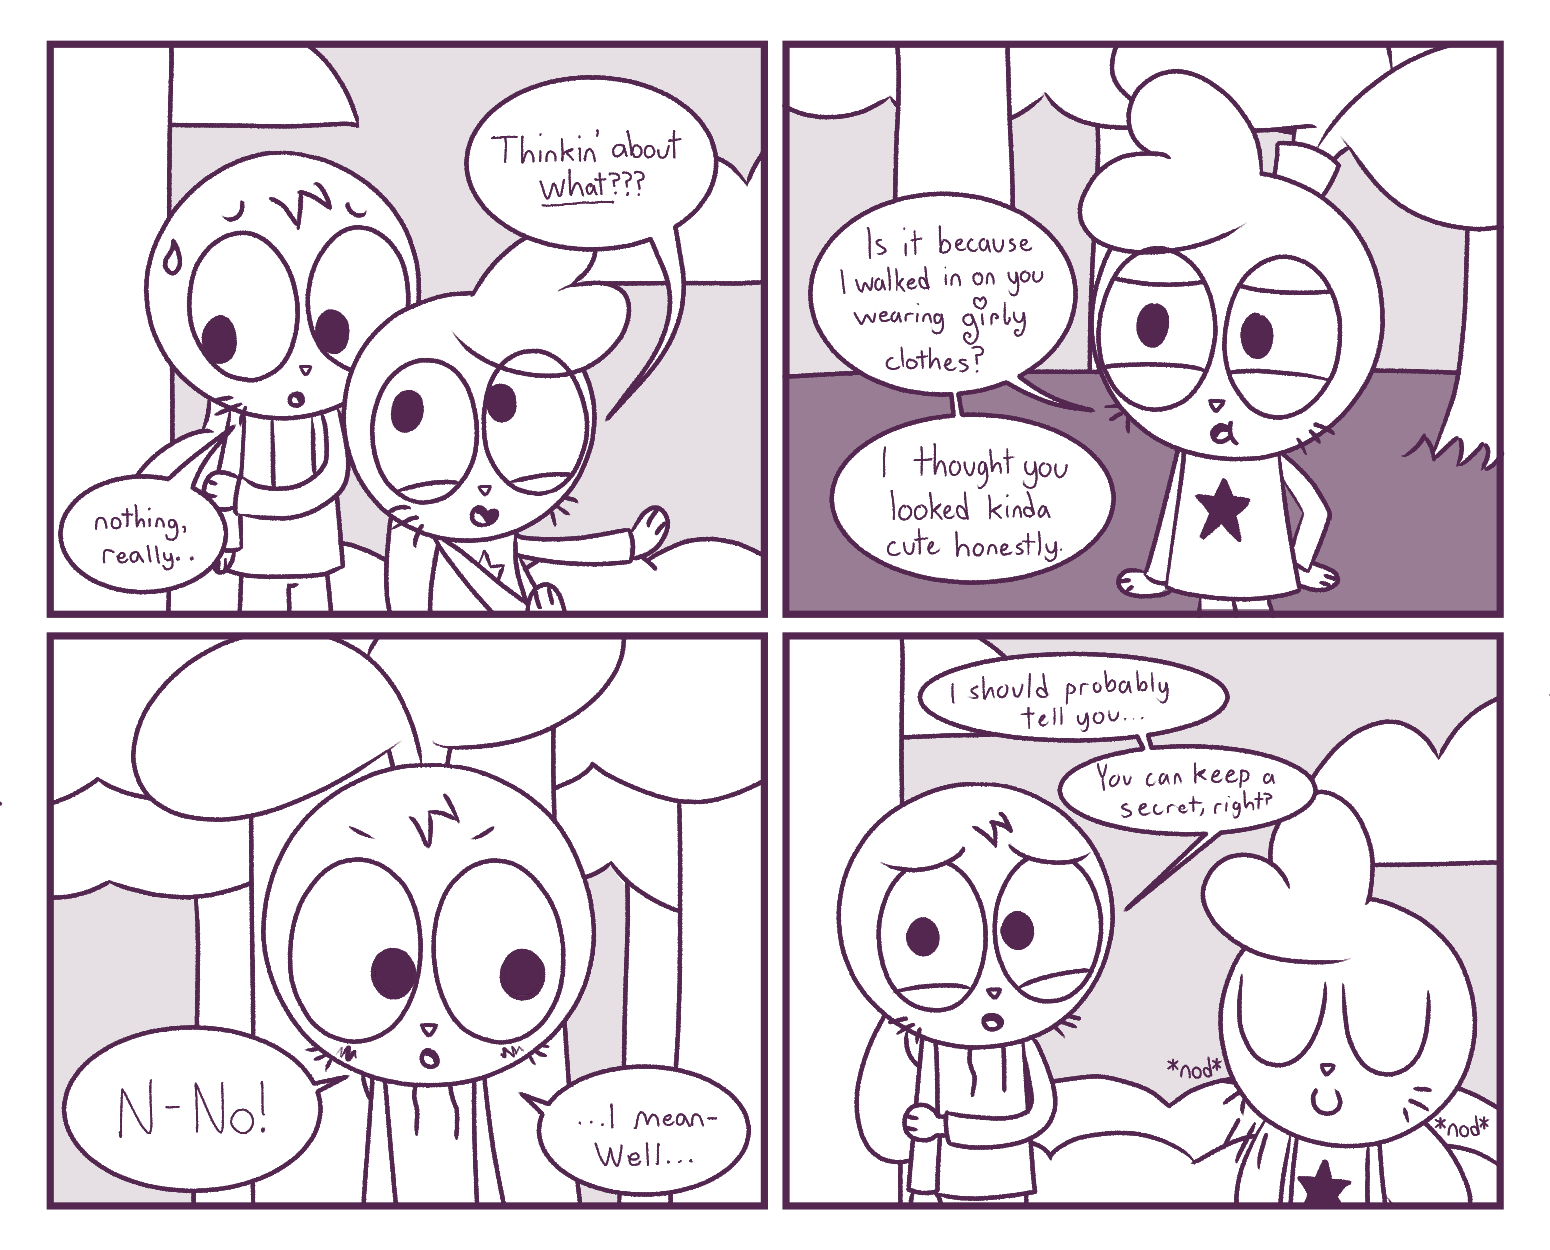 Panel 1: Robyn: Thinkin' about *what*??? - Hazel: nothing, really... / Panel 2: Robyn: Is it because I walked in on you wearing girly clothes? I thought you looked kinda cute honestly. / Panel 3: Hazel: N-No! ...I mean- Well... / Panel 4: Hazel: I should probably tell you... You can keep a secret, right? - Robyn: (nodding)